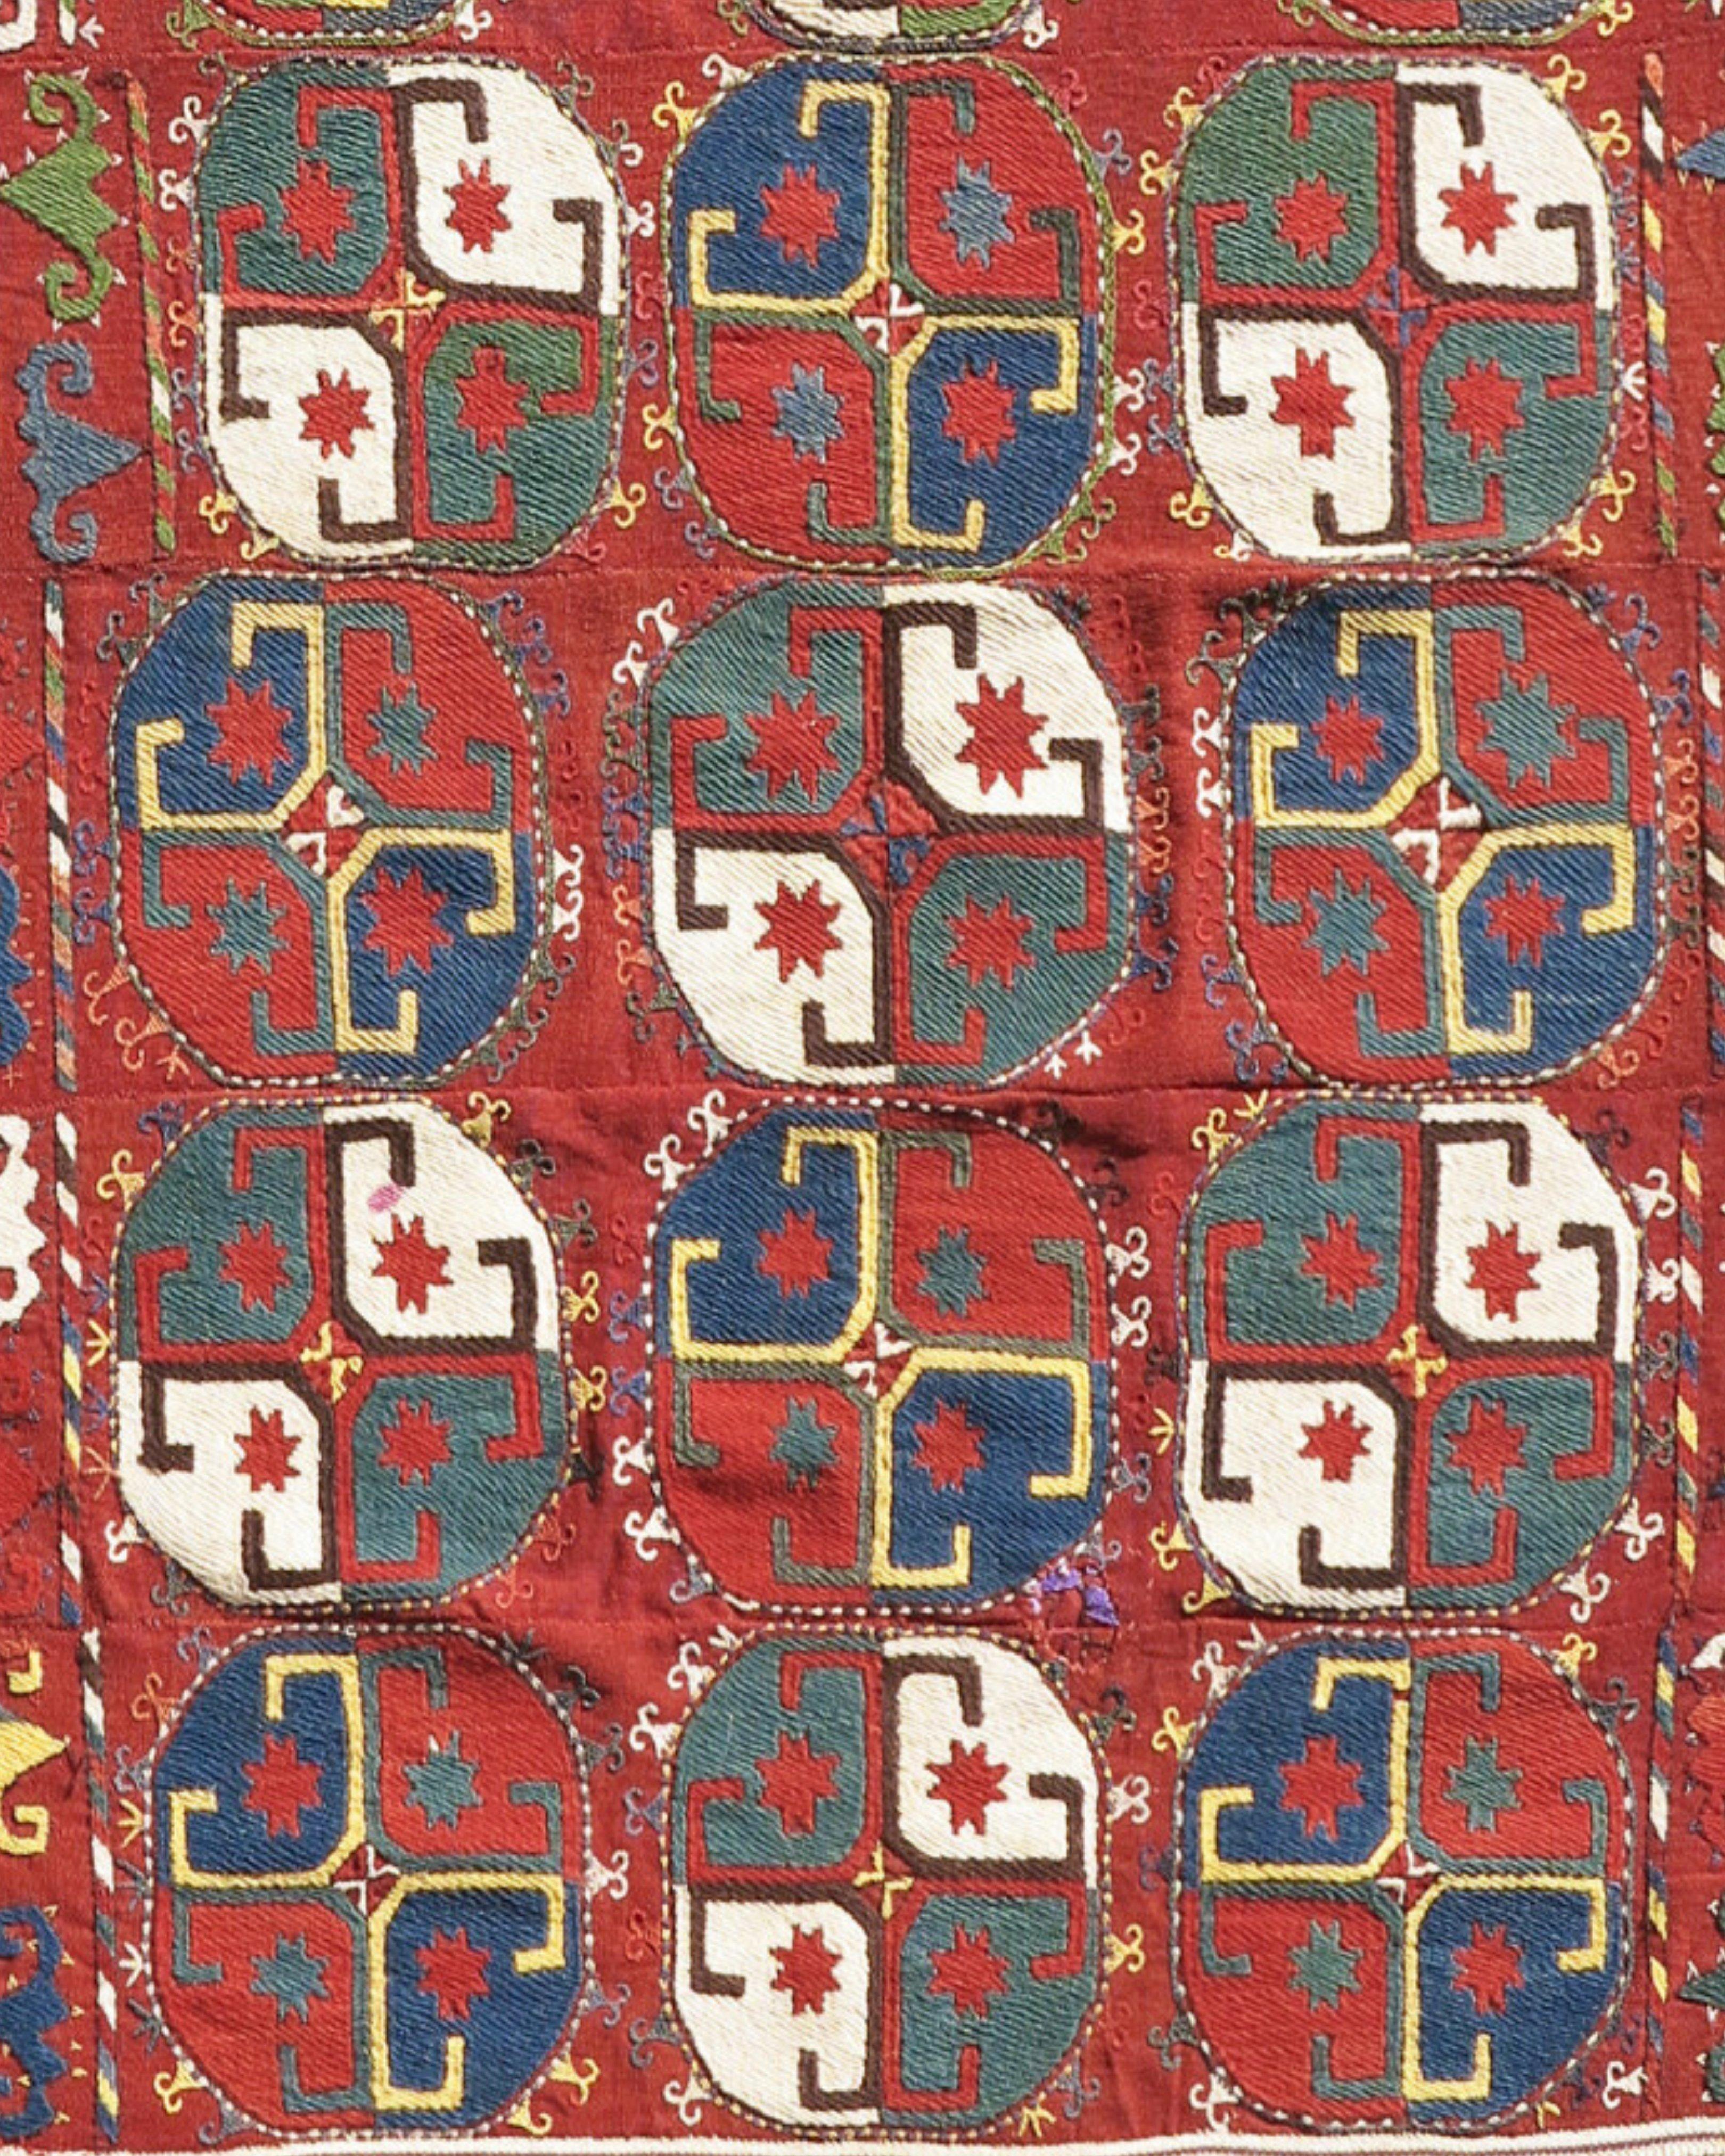 Antique Uzbek Mixed Technique Flatwoven Rug, Early 20th Century

The colorful quartered medallions, or ‘guls,’ with cruciform centers embroidered on this Central Asian flat weave are thought by most authorities to be the work of Lakai Uzbek weavers.